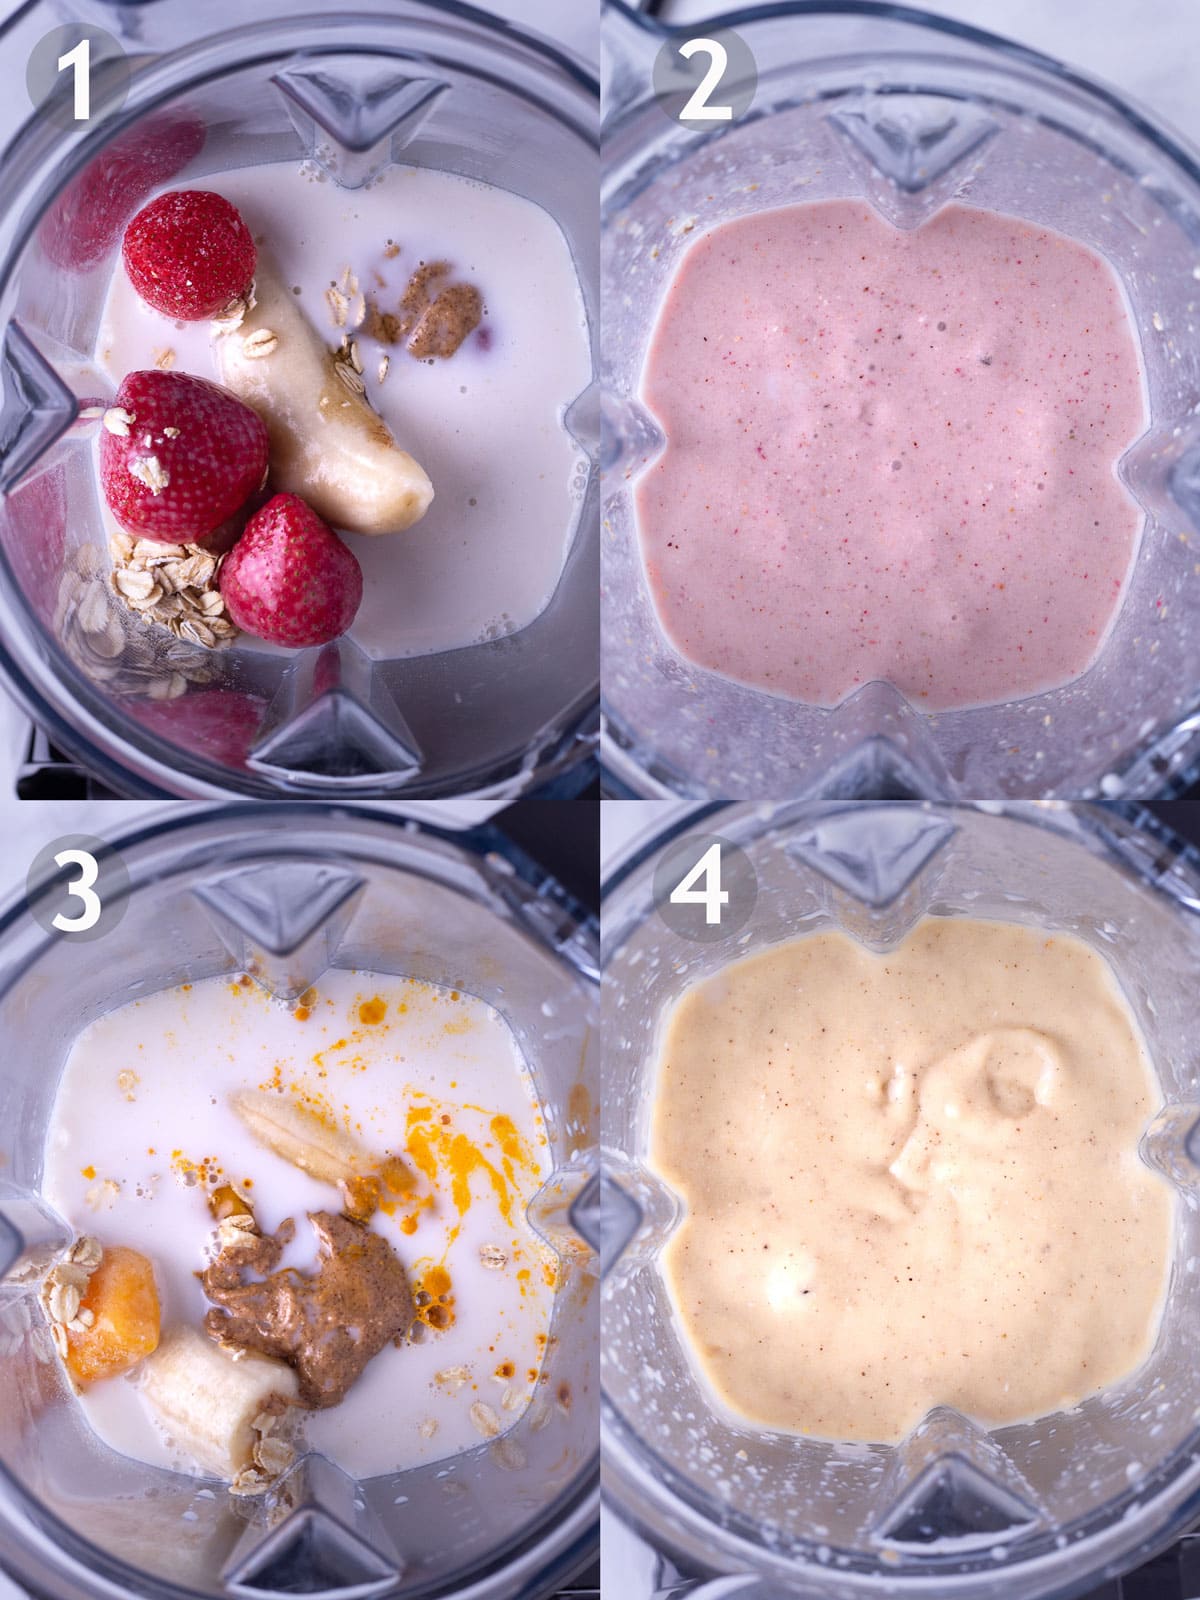 Before and after photos of blending ingredients for strawberry banana oat smoothie and mango turmeric oat smoothie.